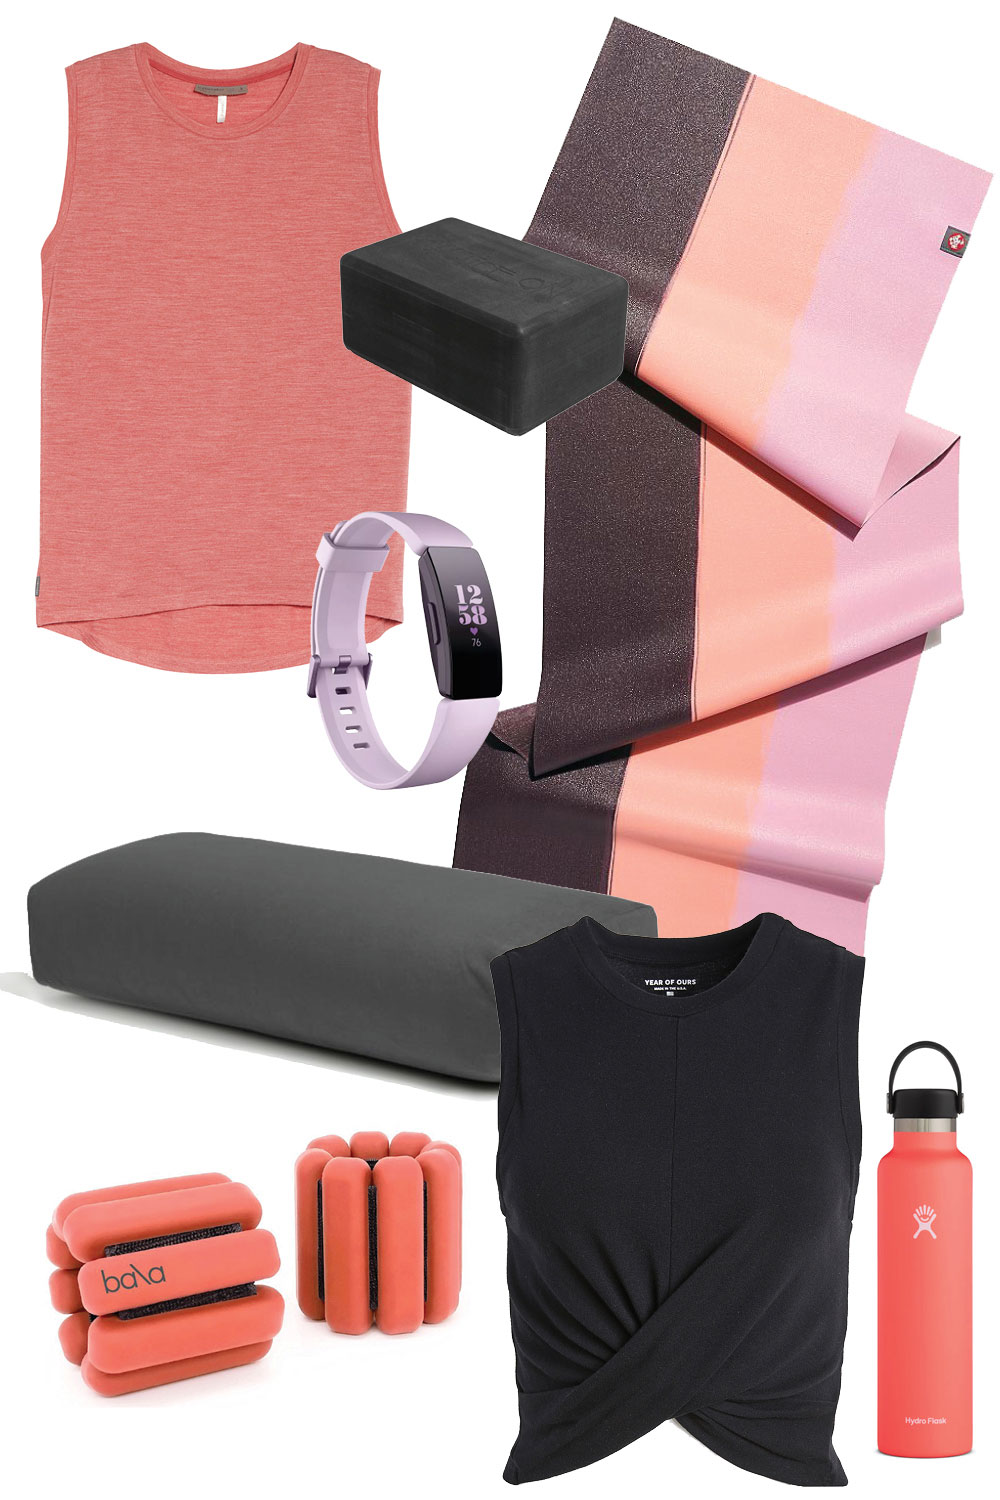 Best At Home Gym Equipment and Workout Gear